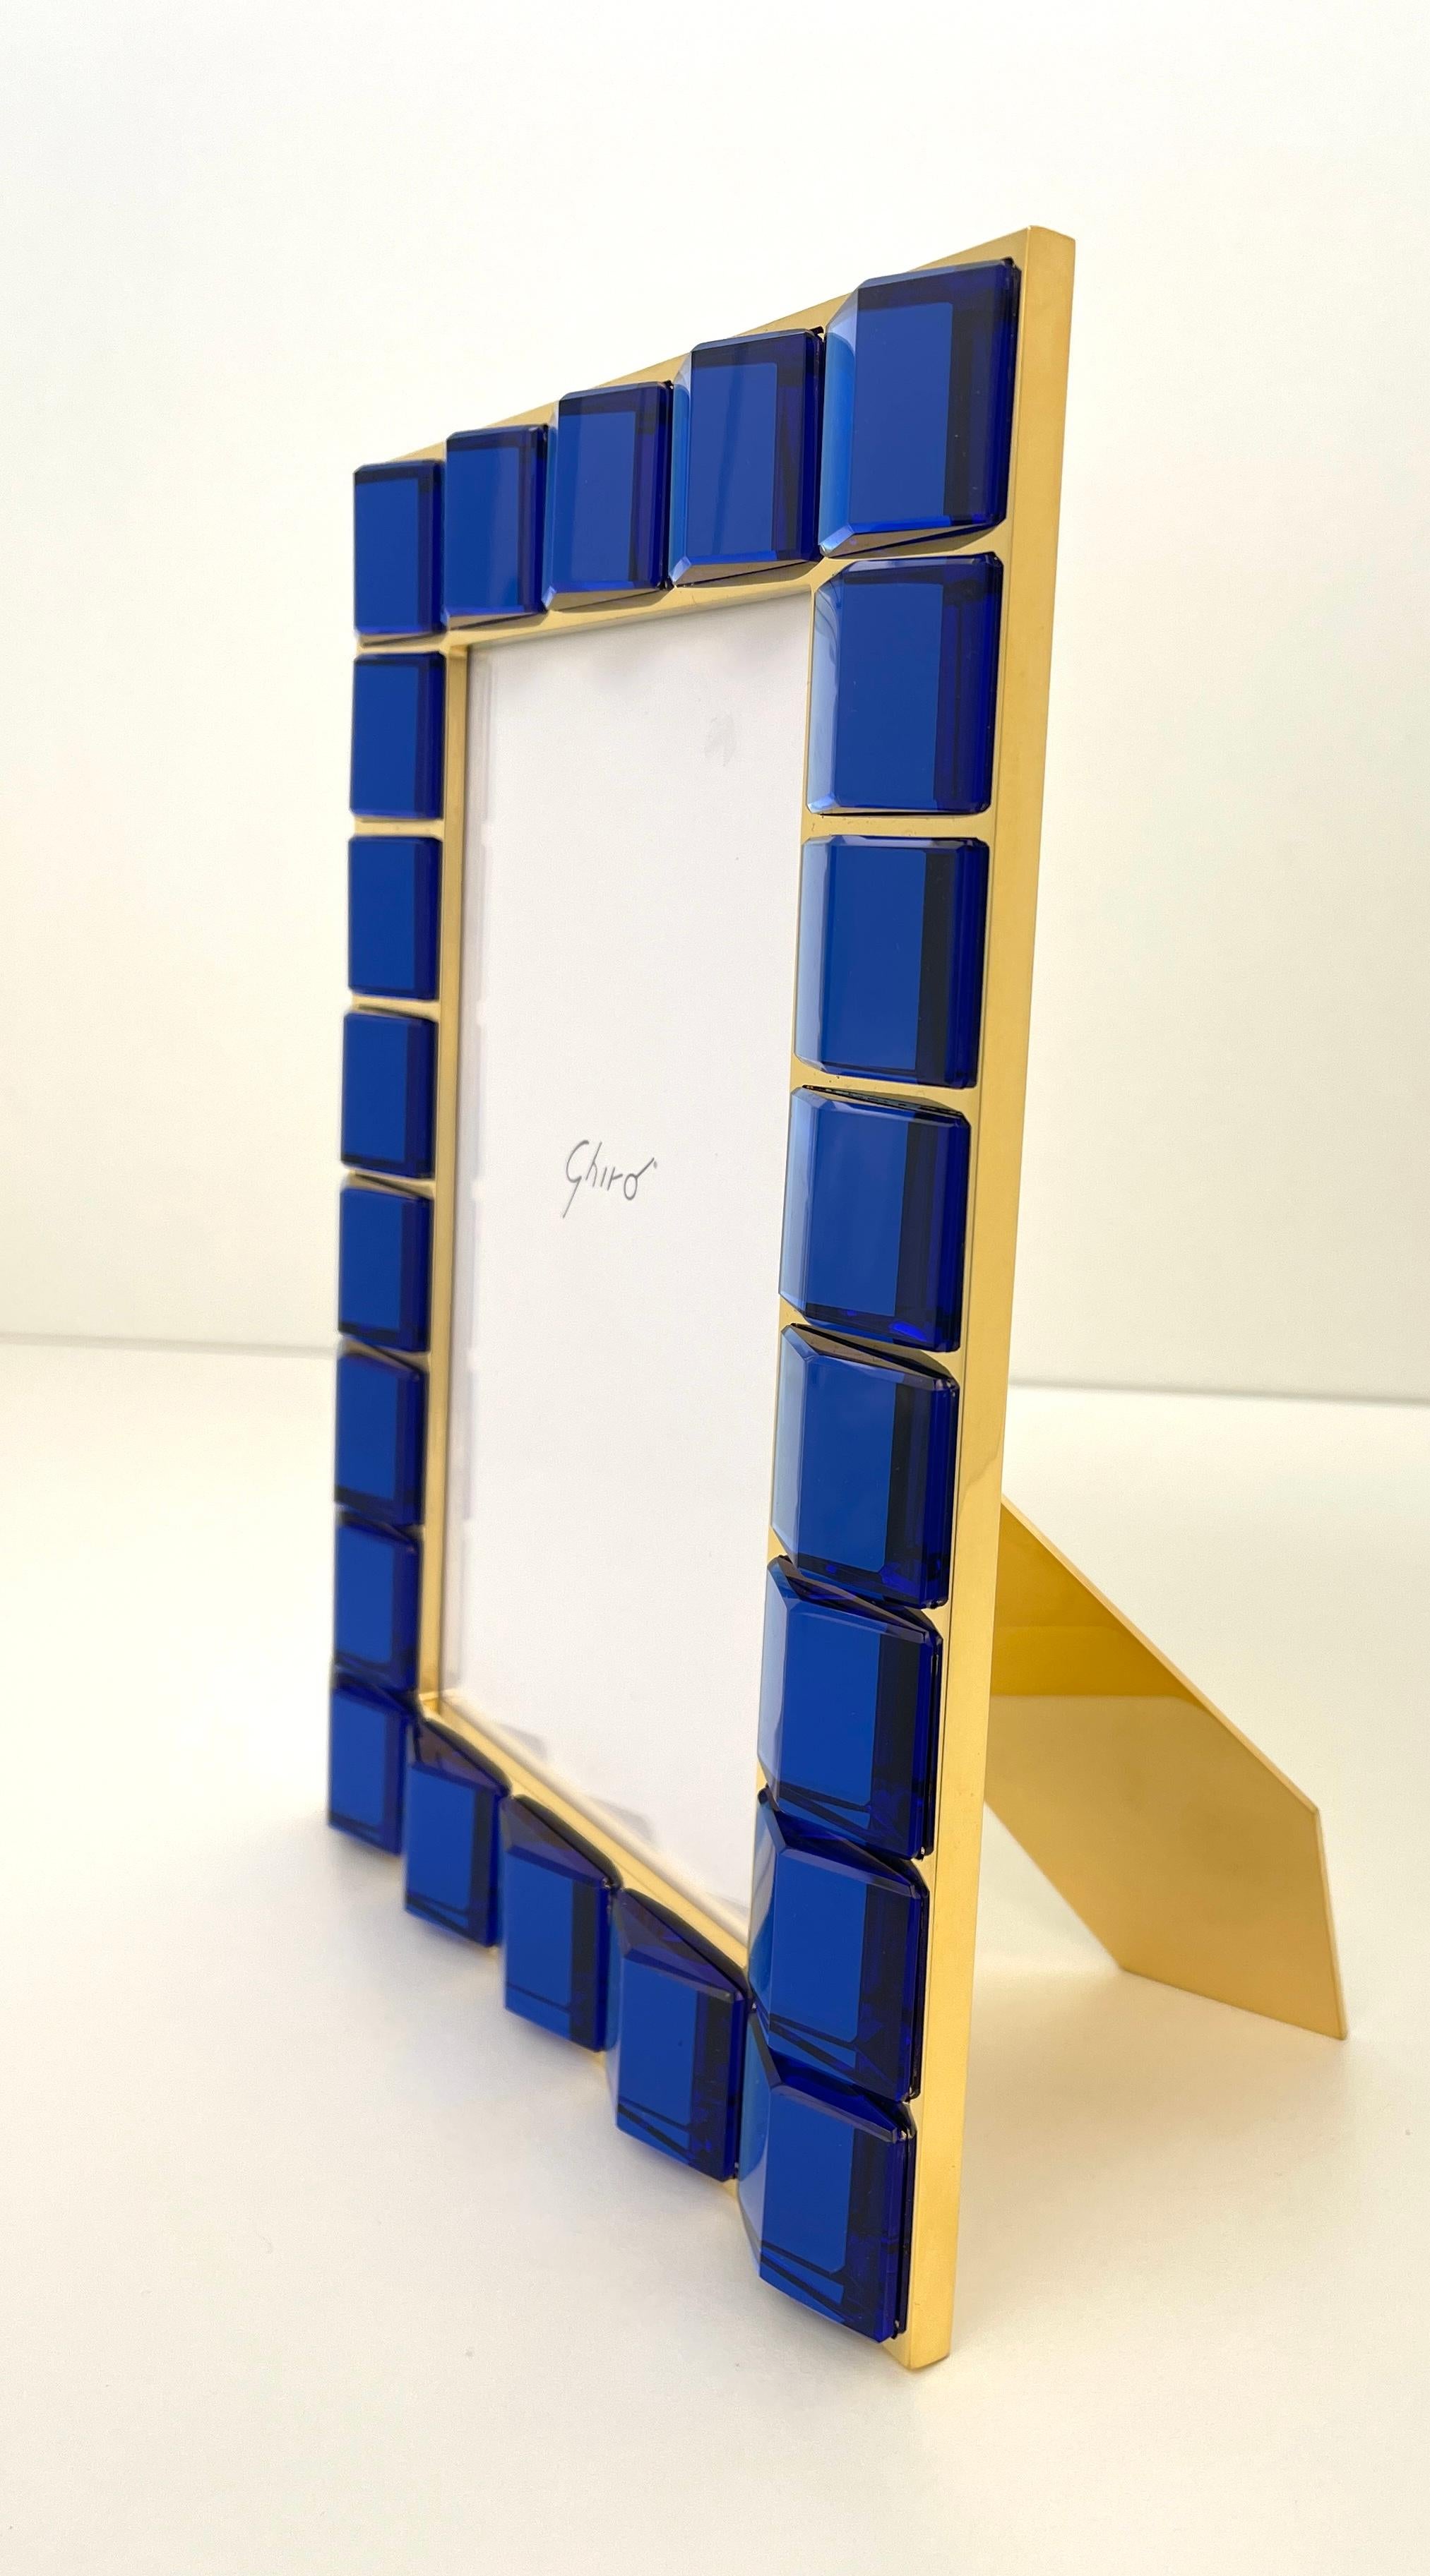 24 kt gold plated brass photo frame.
The frame is embellished with entirely handmade blue glass. Each crystal is set into the metal seat individually with extreme care and attention.
The shape of the glass, its intense and luminous color combine